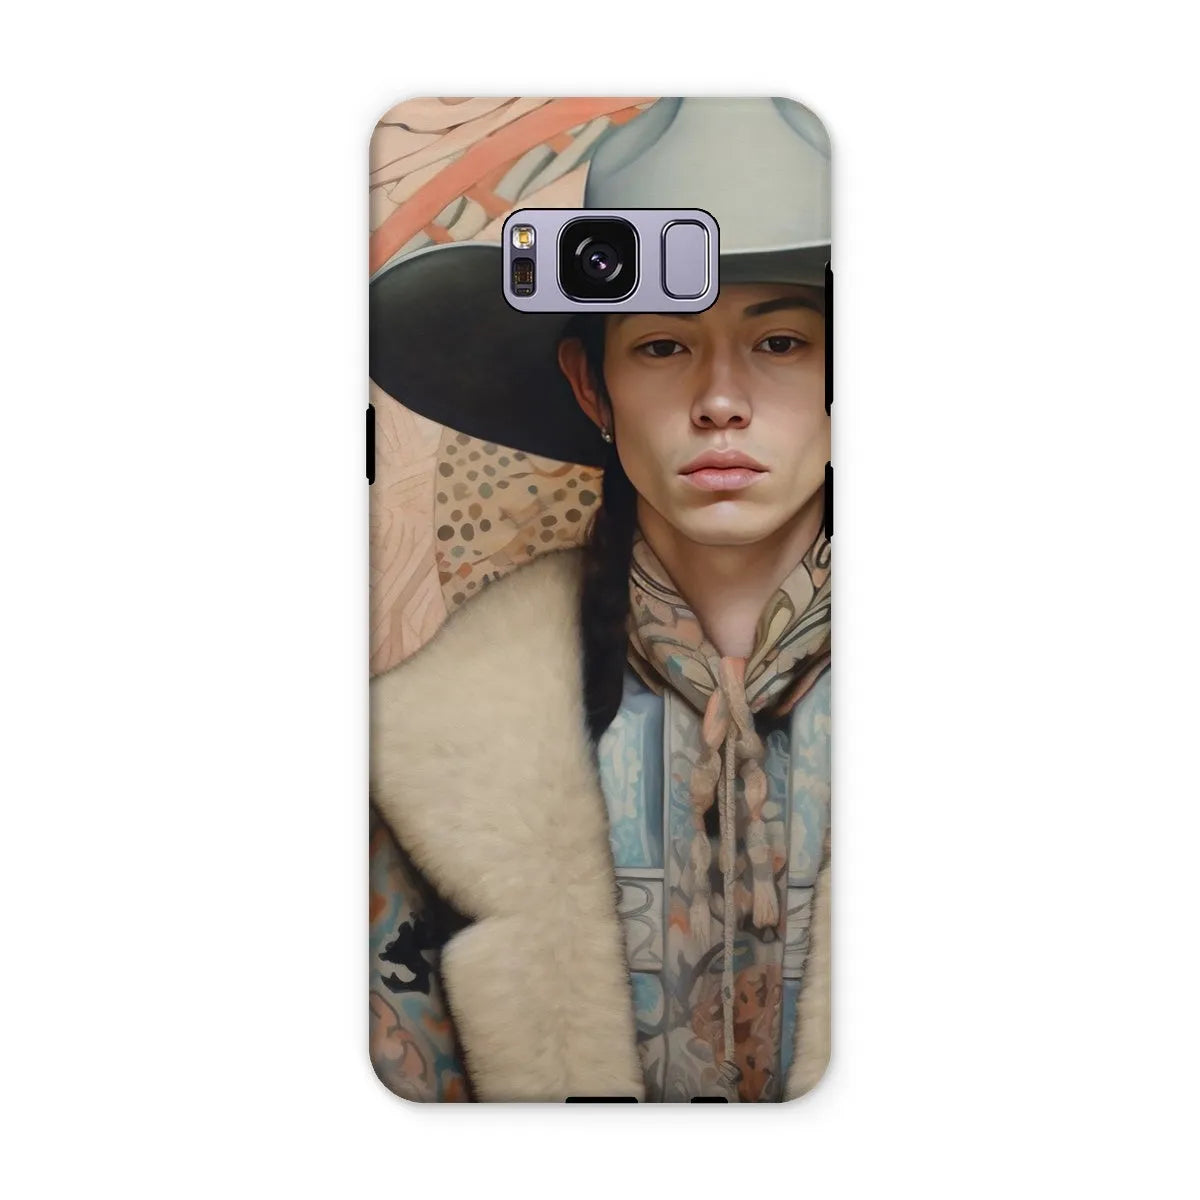 Jacy The Gay Cowboy - Dandy Gay Aesthetic Art Phone Case - Samsung Galaxy S8 Plus / Matte - Mobile Phone Cases